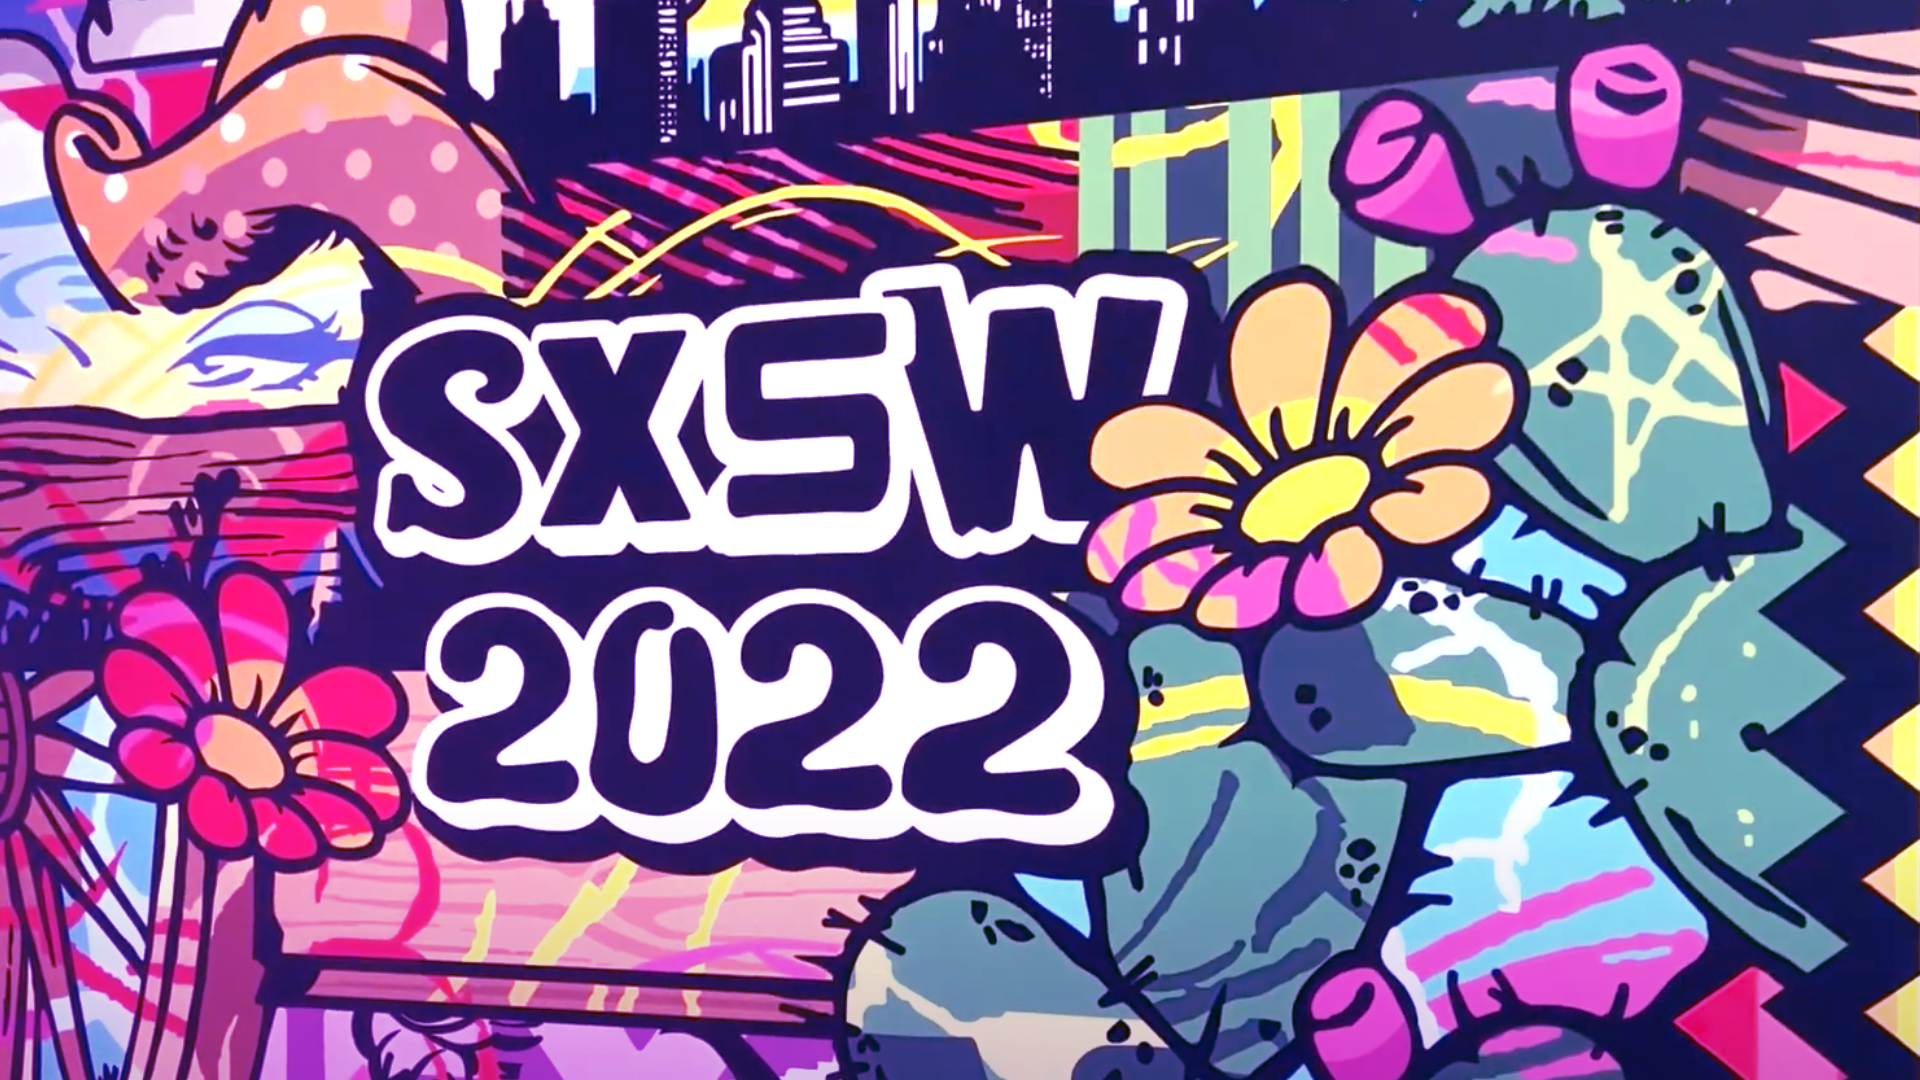 Colorful mural where SXSW 2022 is written.